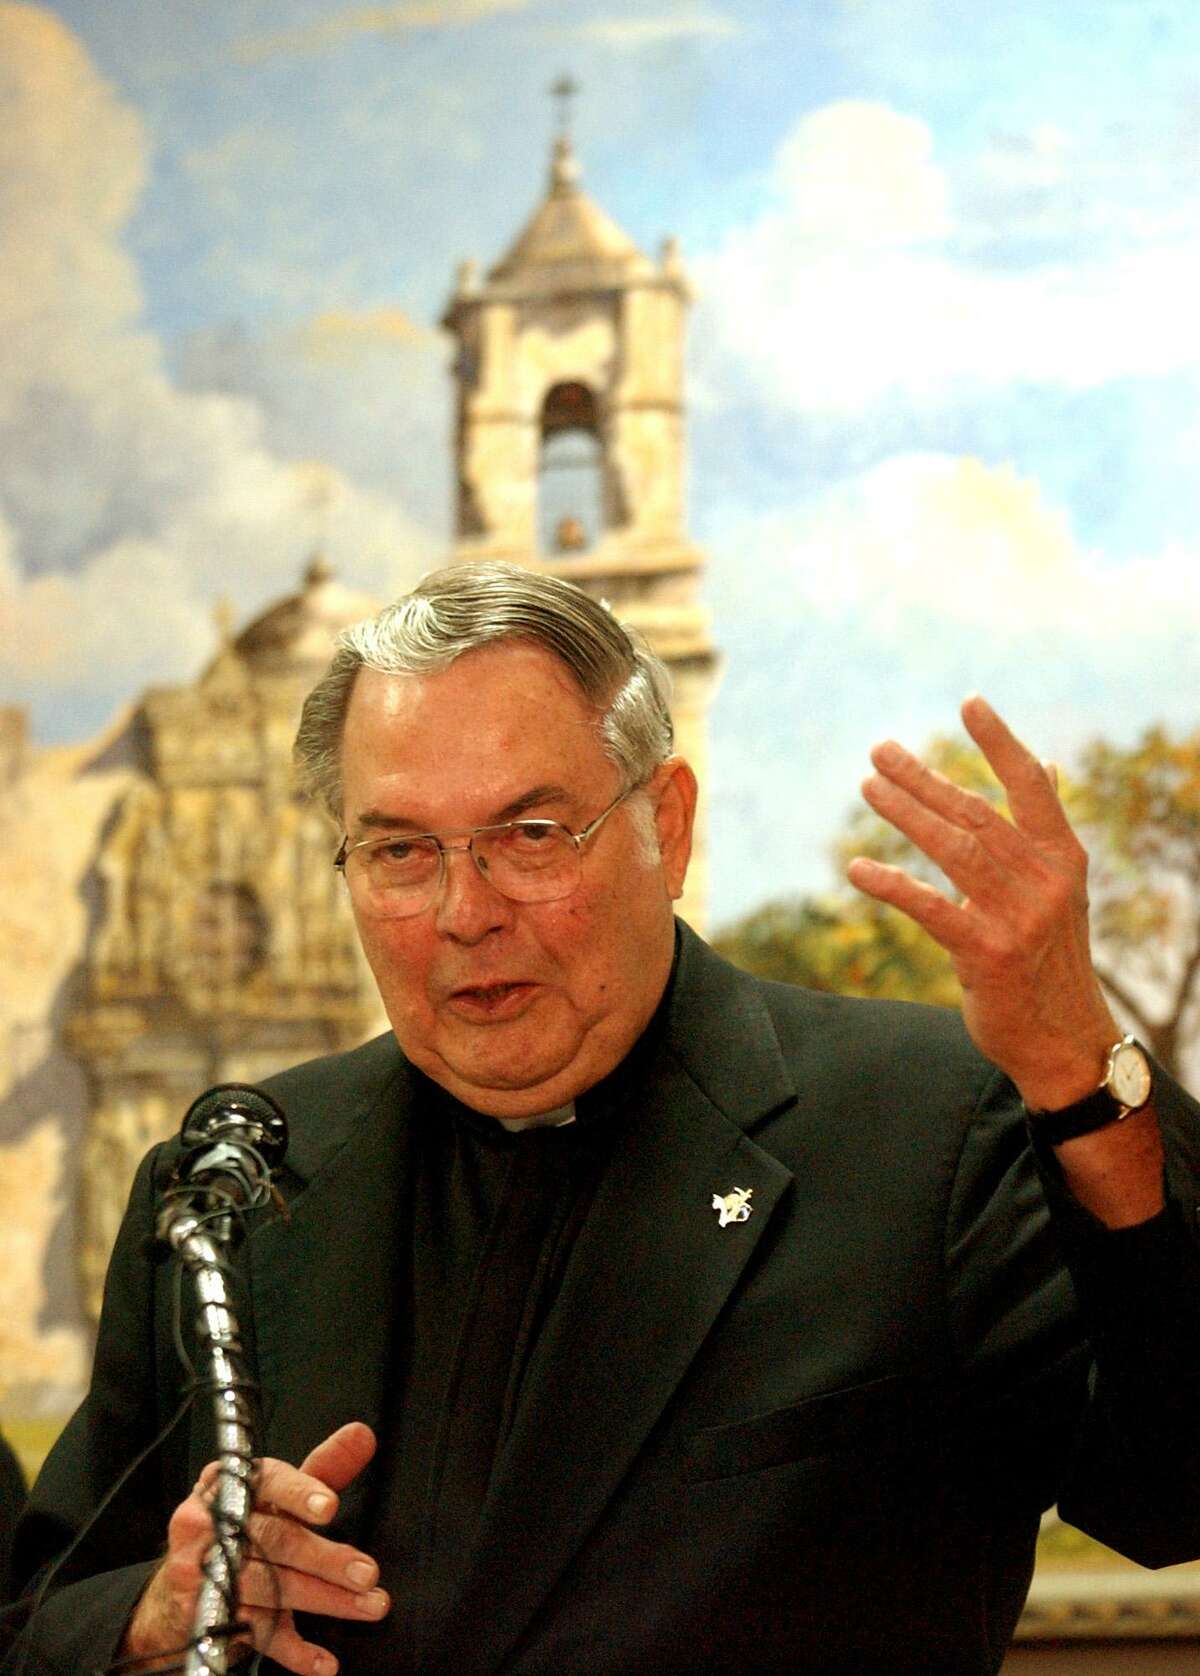 Monsignor Lawrence Stuebben, vicar general of the Archdiocese of San Antonio, speaks about the archdiocese's ad hoc committee on sexual abuse during a press conference at the chancery on Tuesday, Oct. 1, 2002. BILLY CALZADA / STAFF